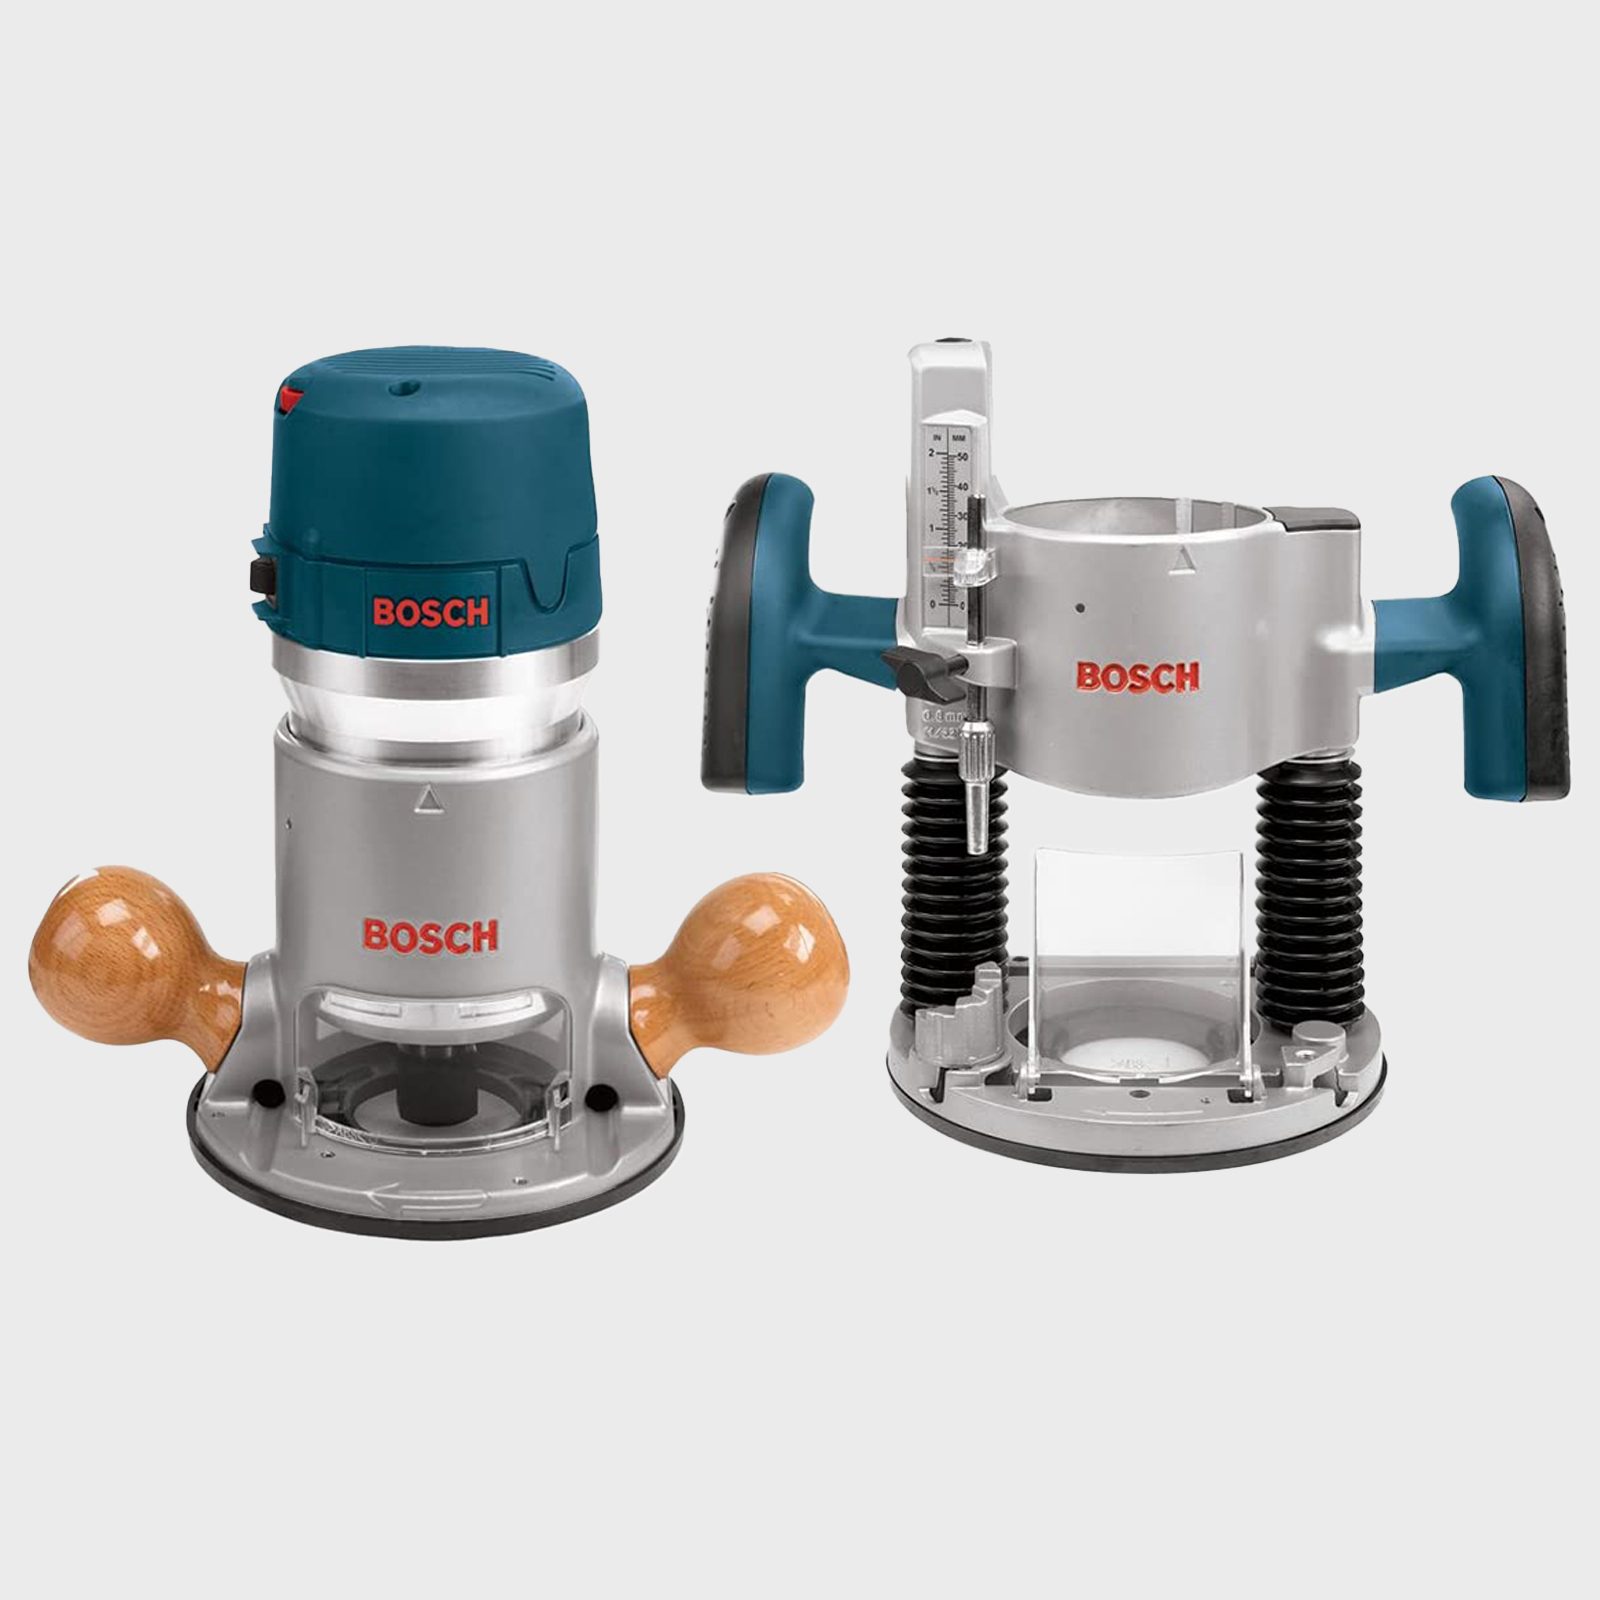 Bosch Plunge Router And Fixed Base Kit Via Amazon 2